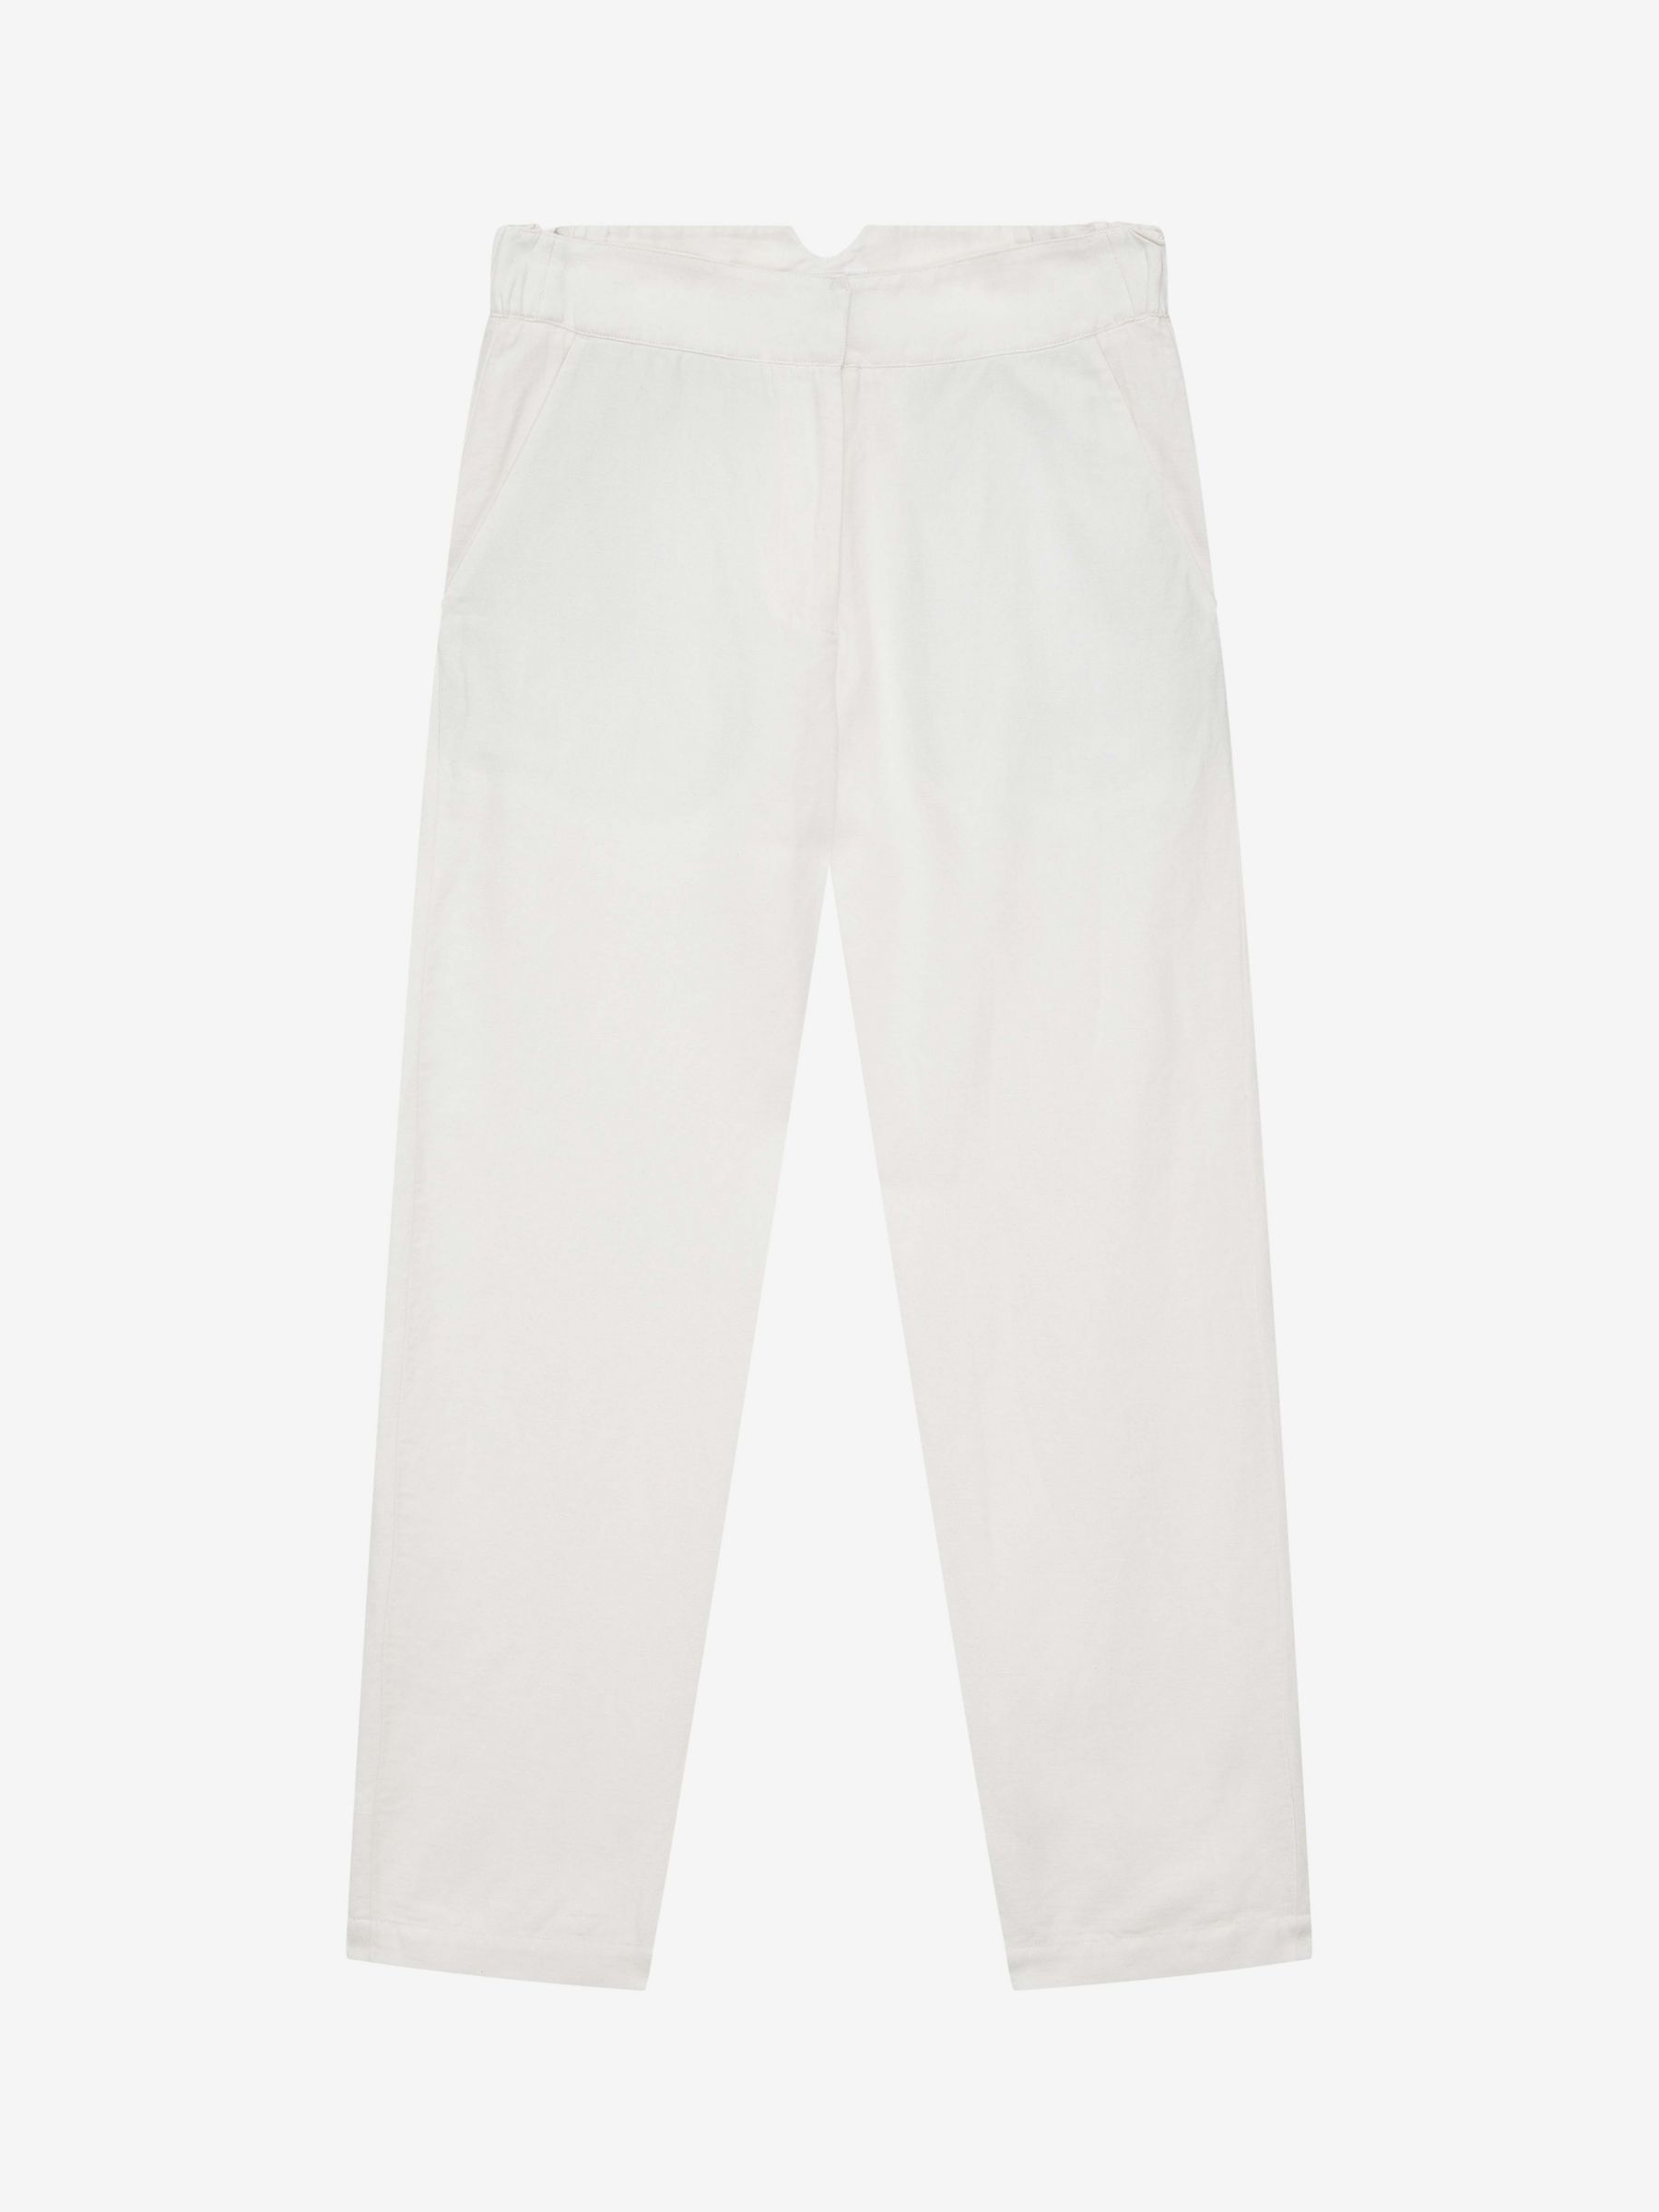 Brora Cotton Linen Blend Tapered Trousers, White, 6